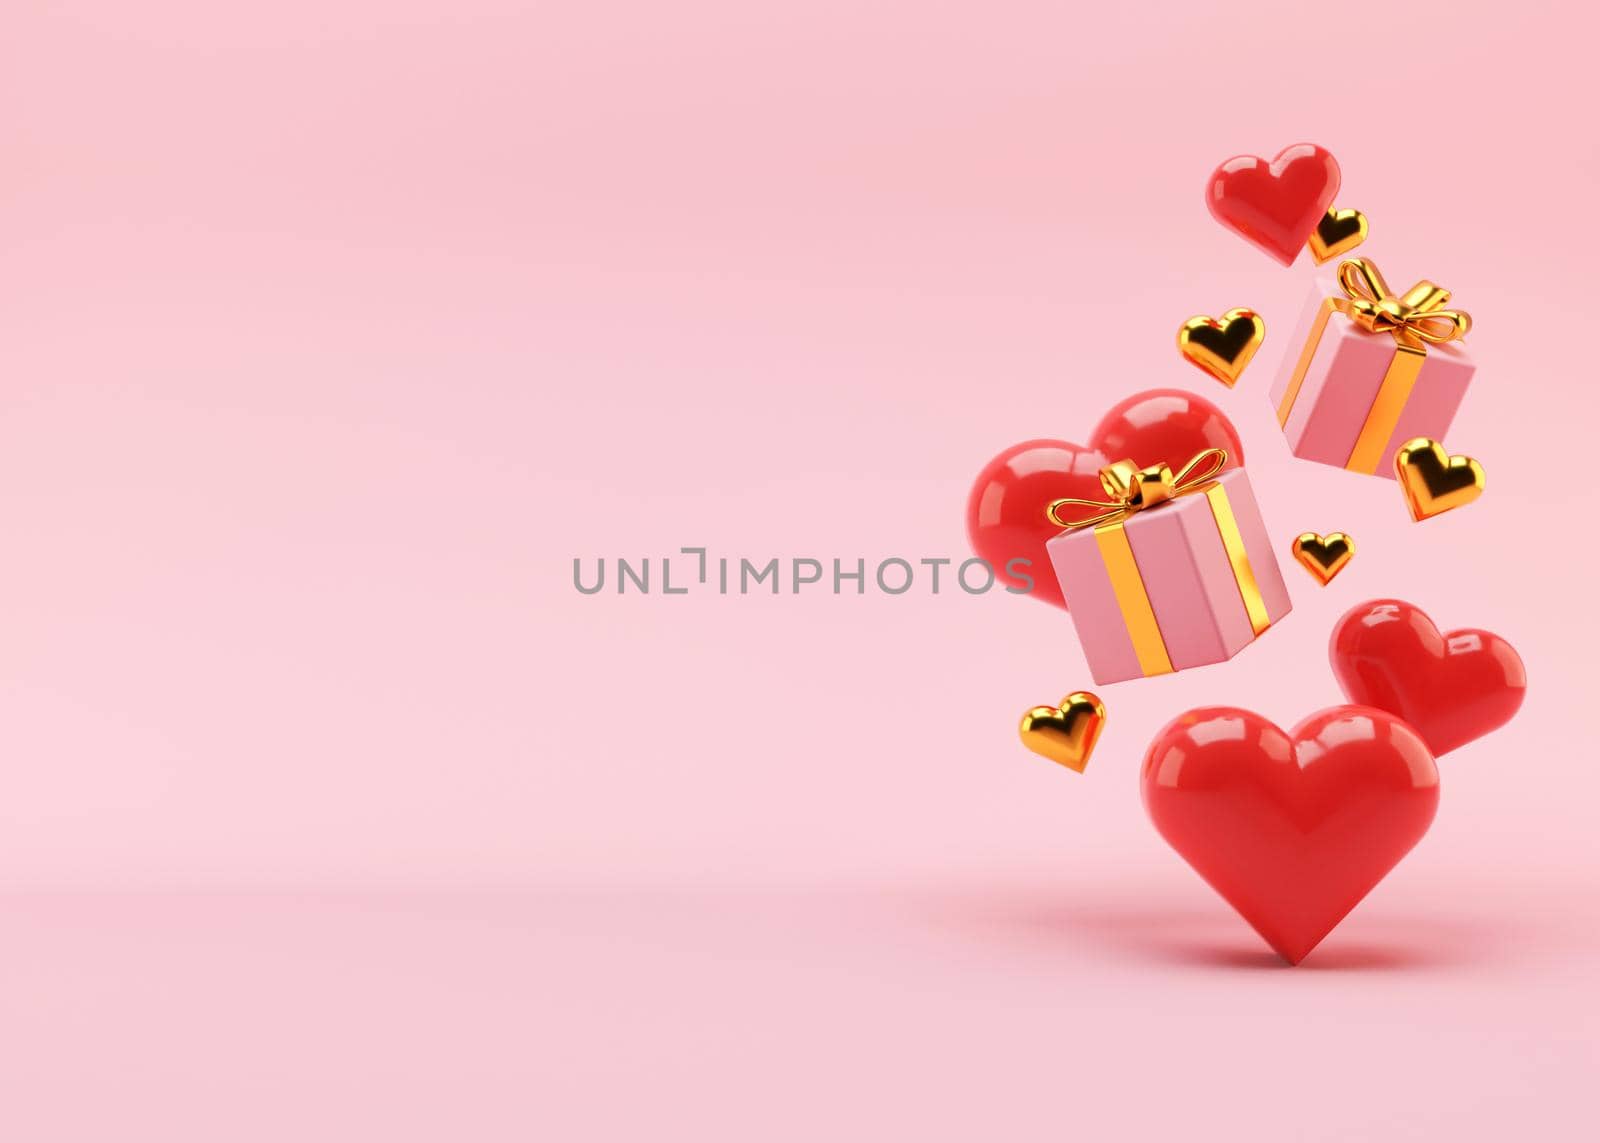 Red hearts and presents flying on pink background. Valentine's Day backdrop with free space for text, copy space. Postcard, greeting card design. 3D illustration. Love